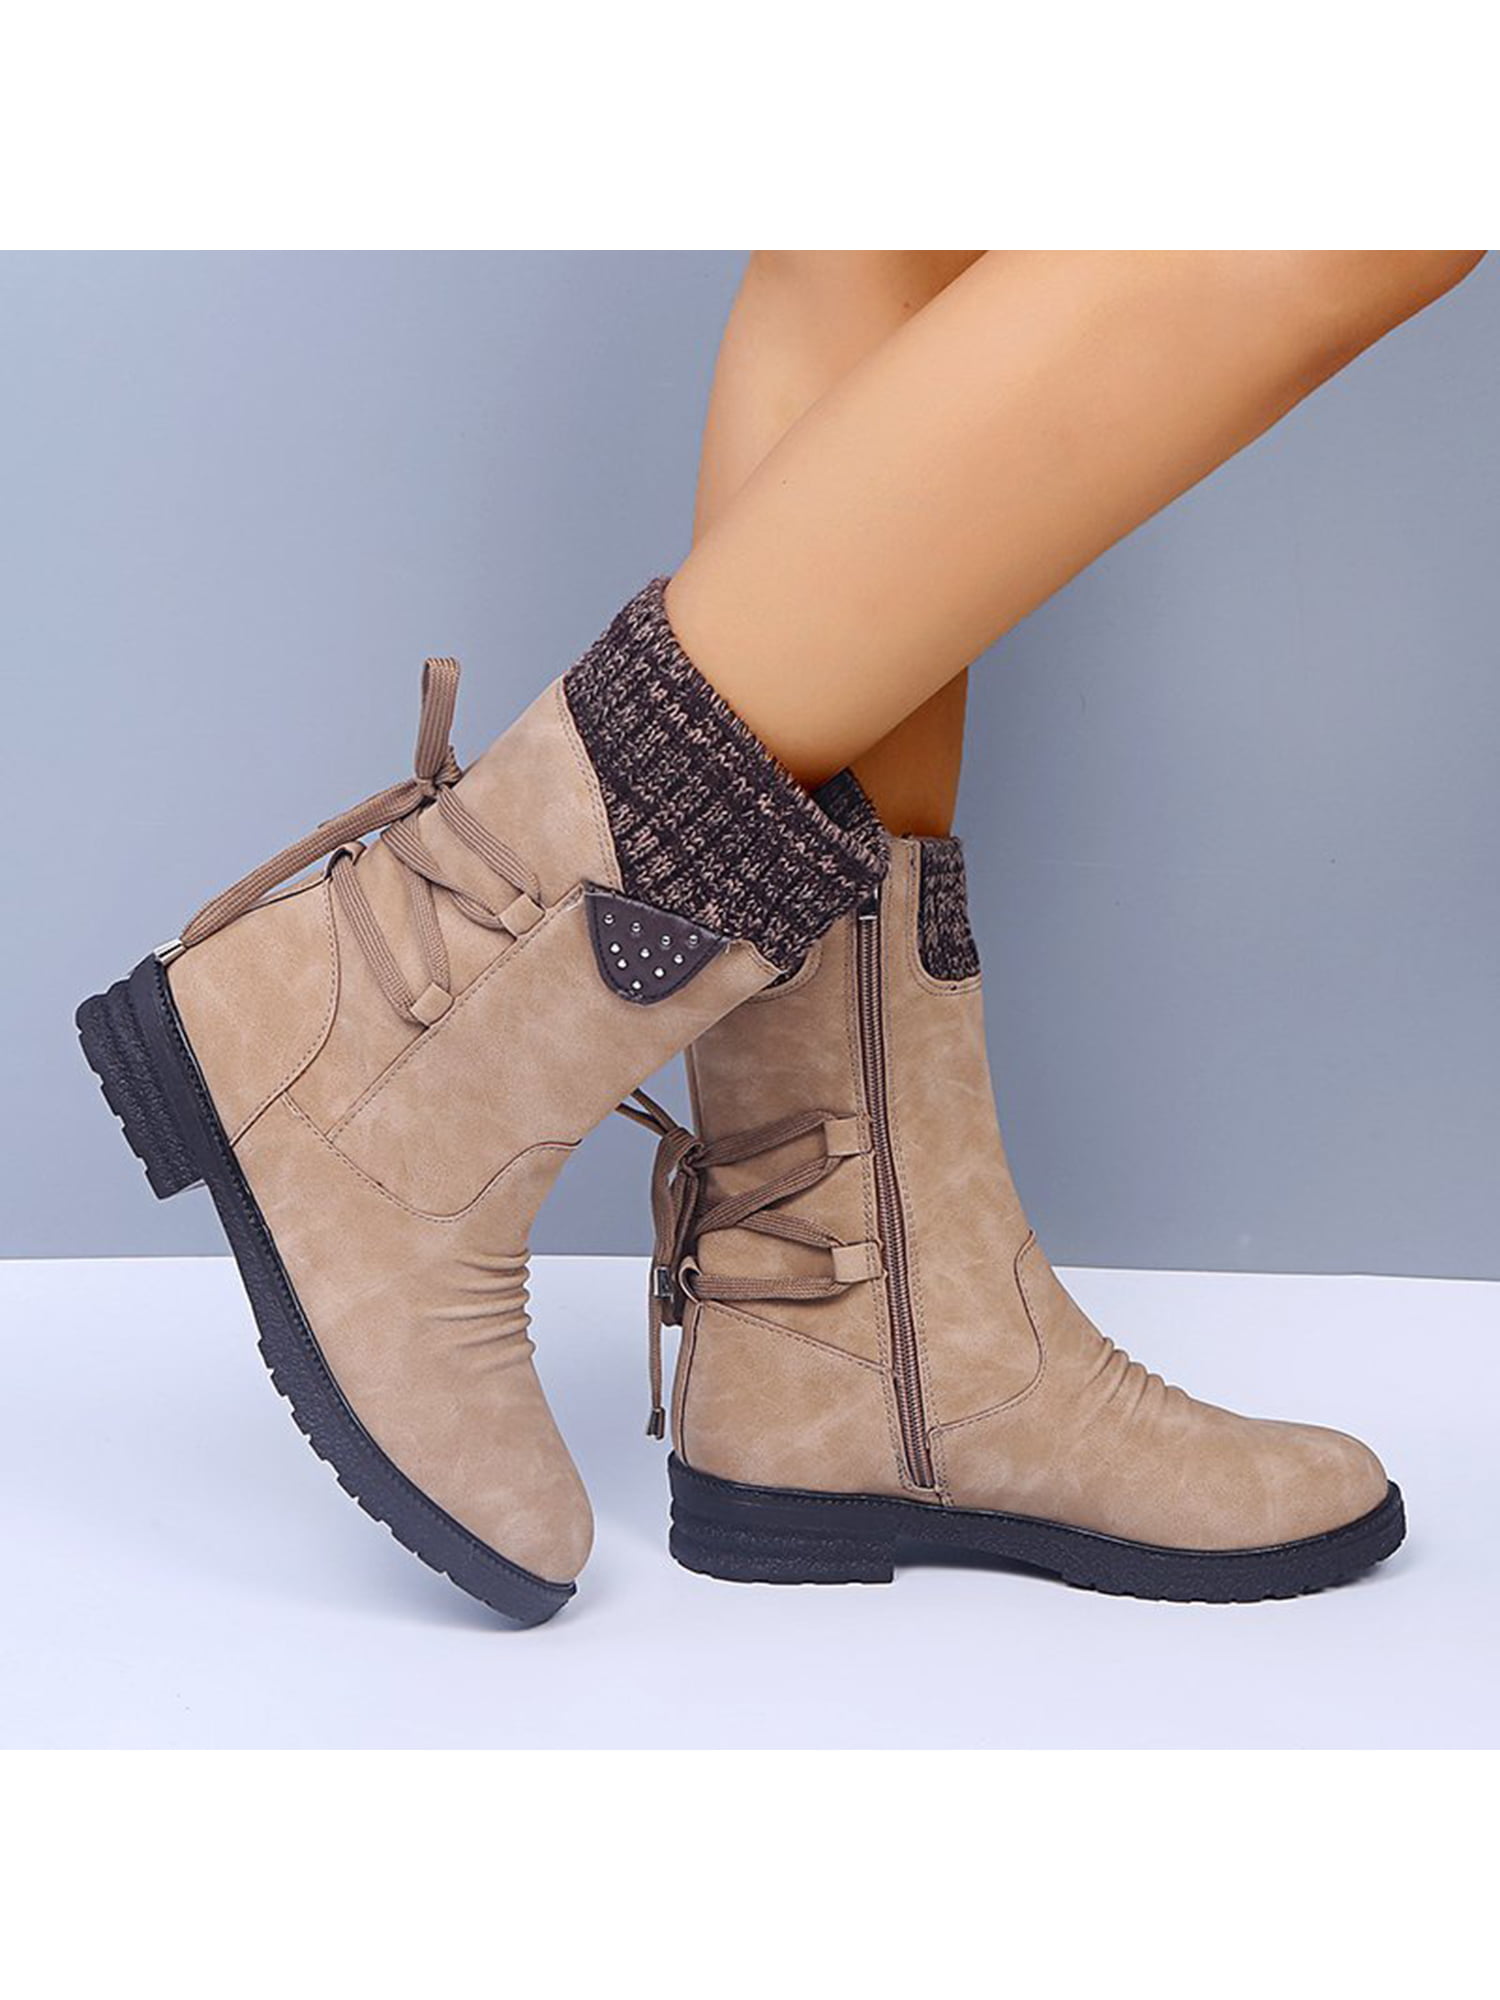 Details about   Womens Over Knee Thigh High Boots Stretch Calf Leg Ladies Mid Heel Shoes Size D 